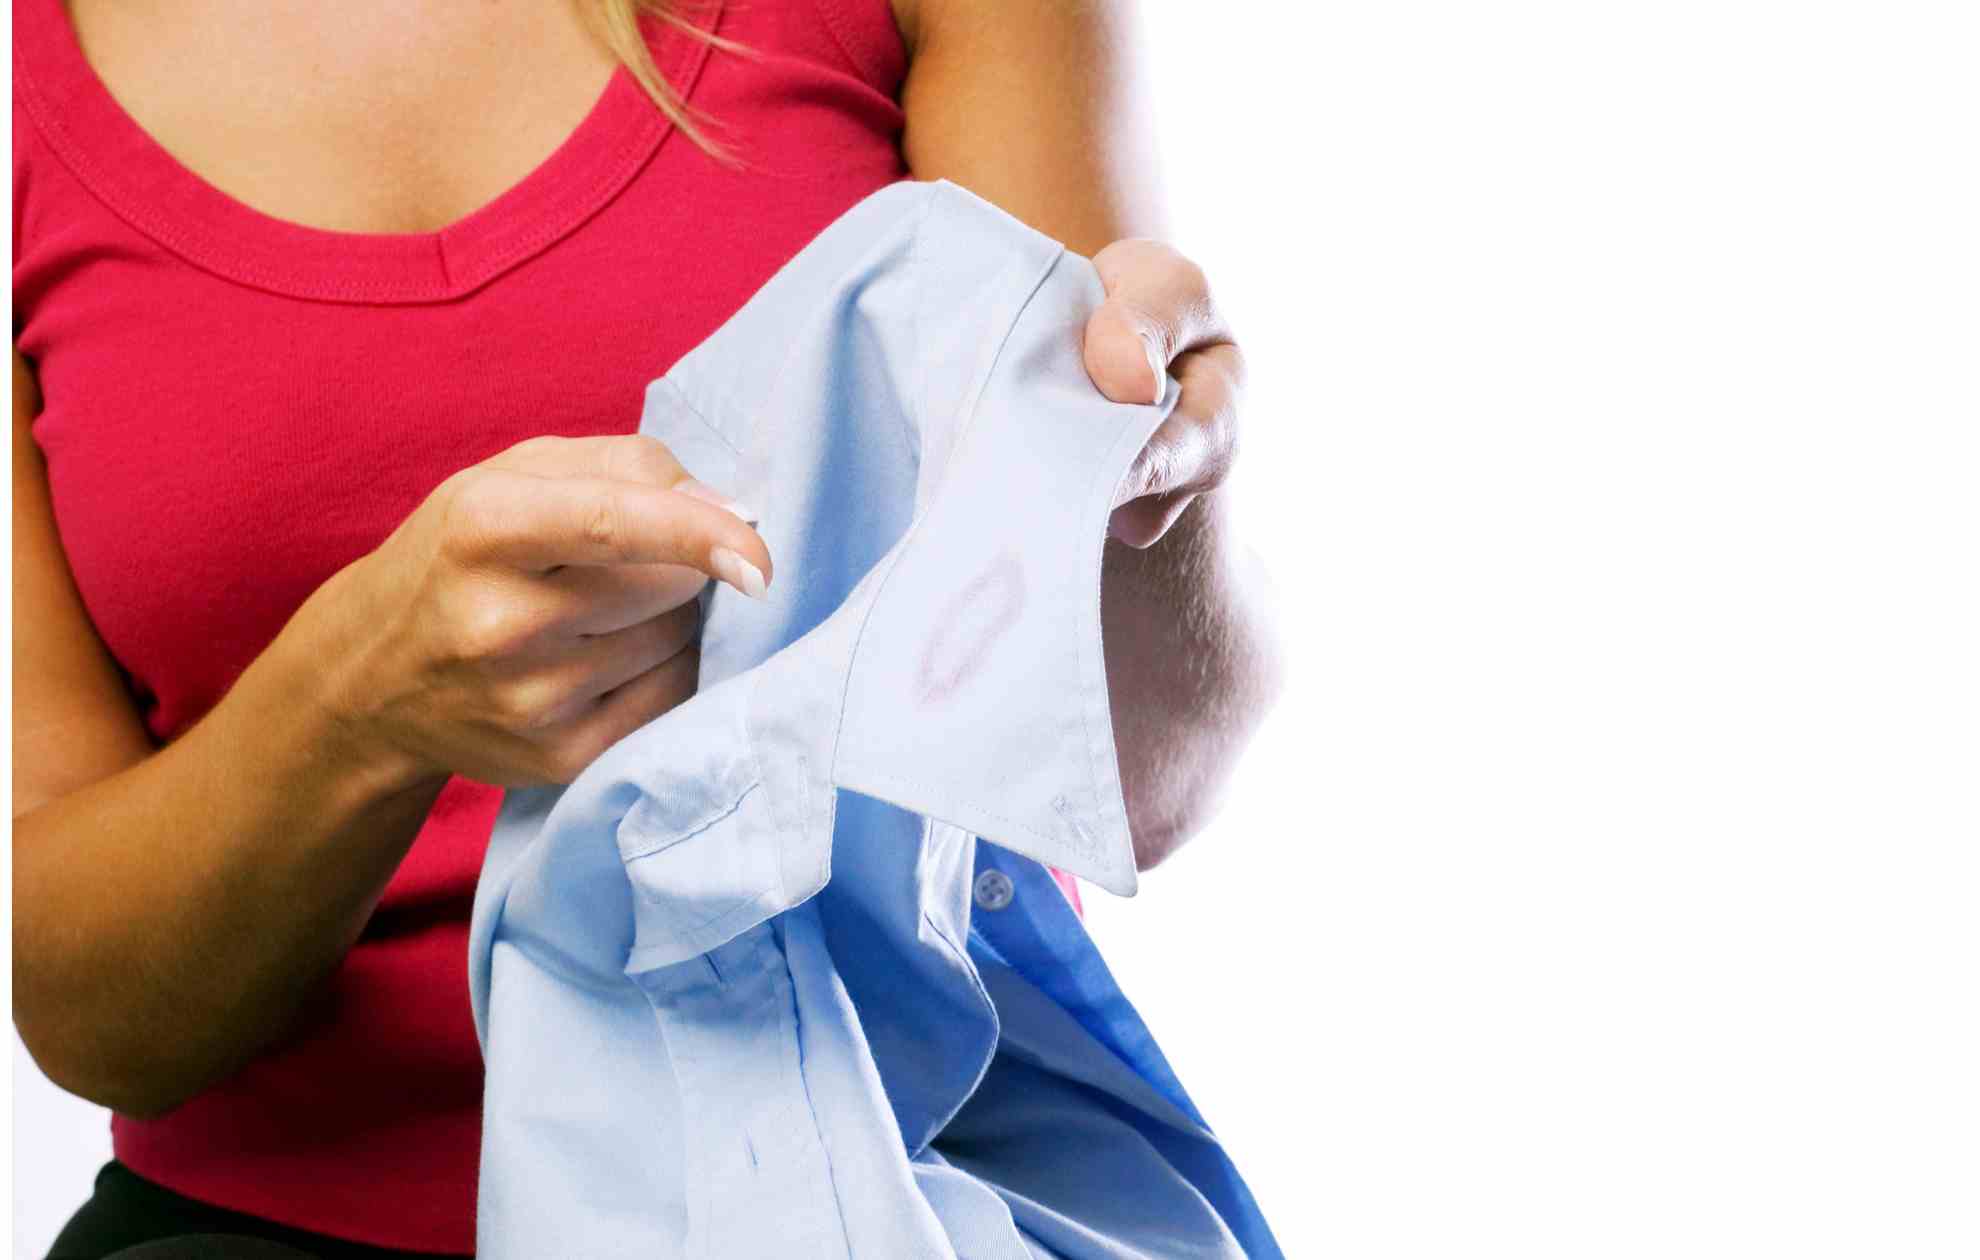 A woman is holding up a blue shirt for alterations or dry cleaning.